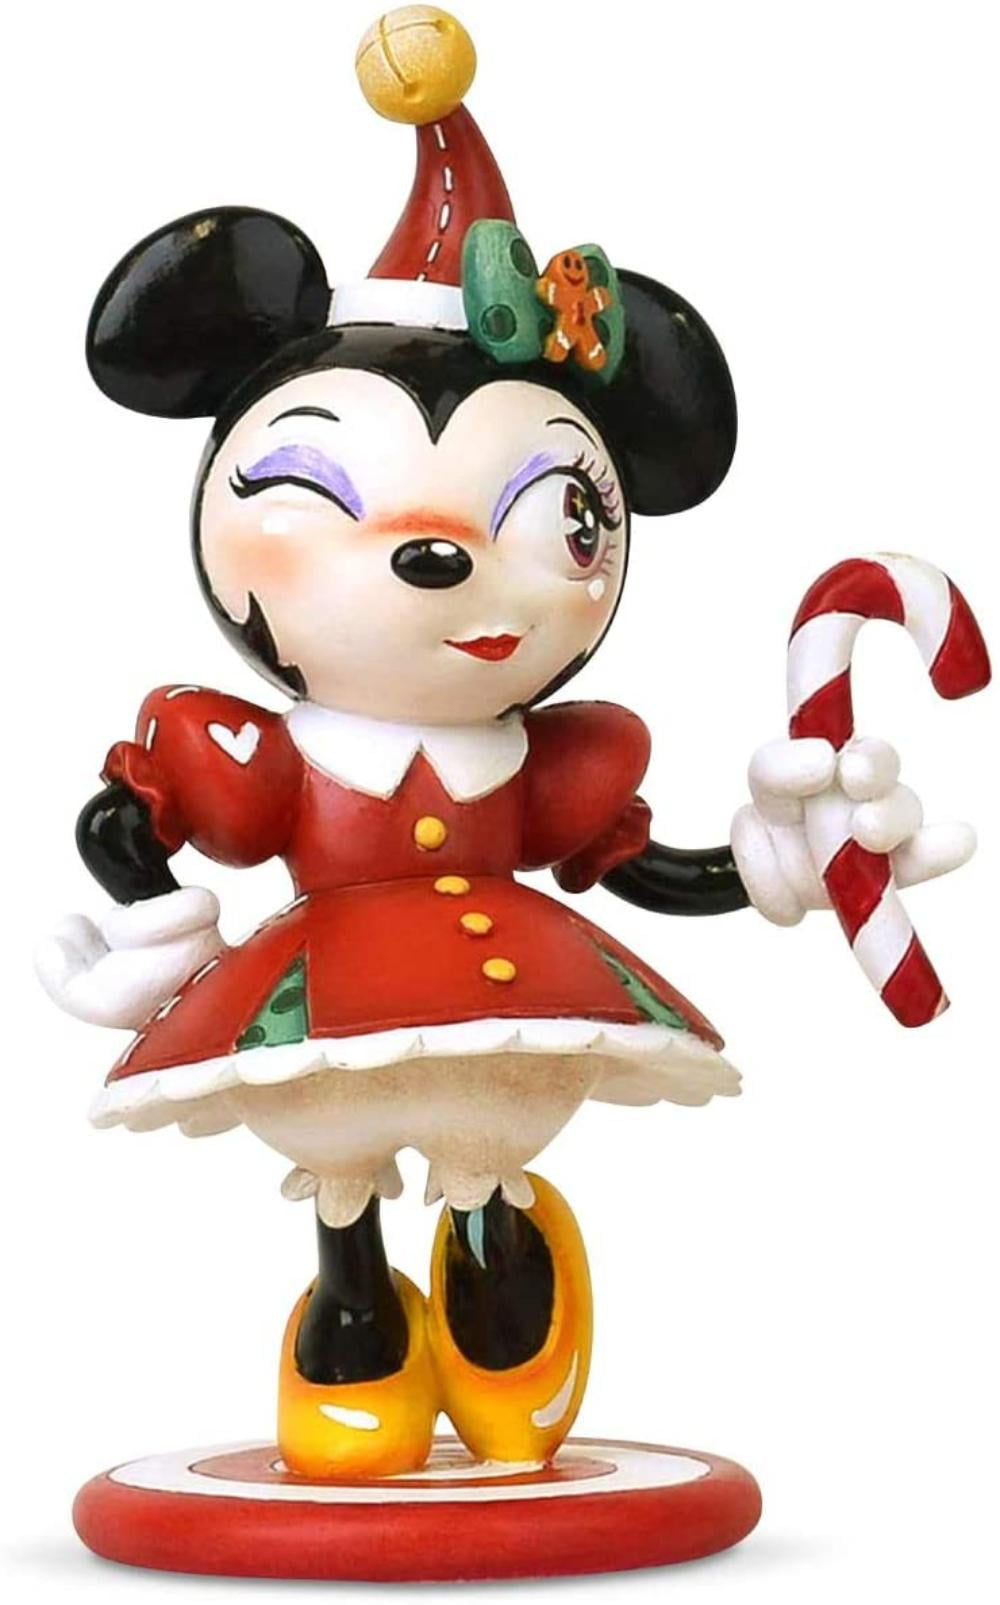 5.91 Inch Multicolor,6003765 Enesco The World of Miss Mindy Christmas Mickey Mouse Figurine 